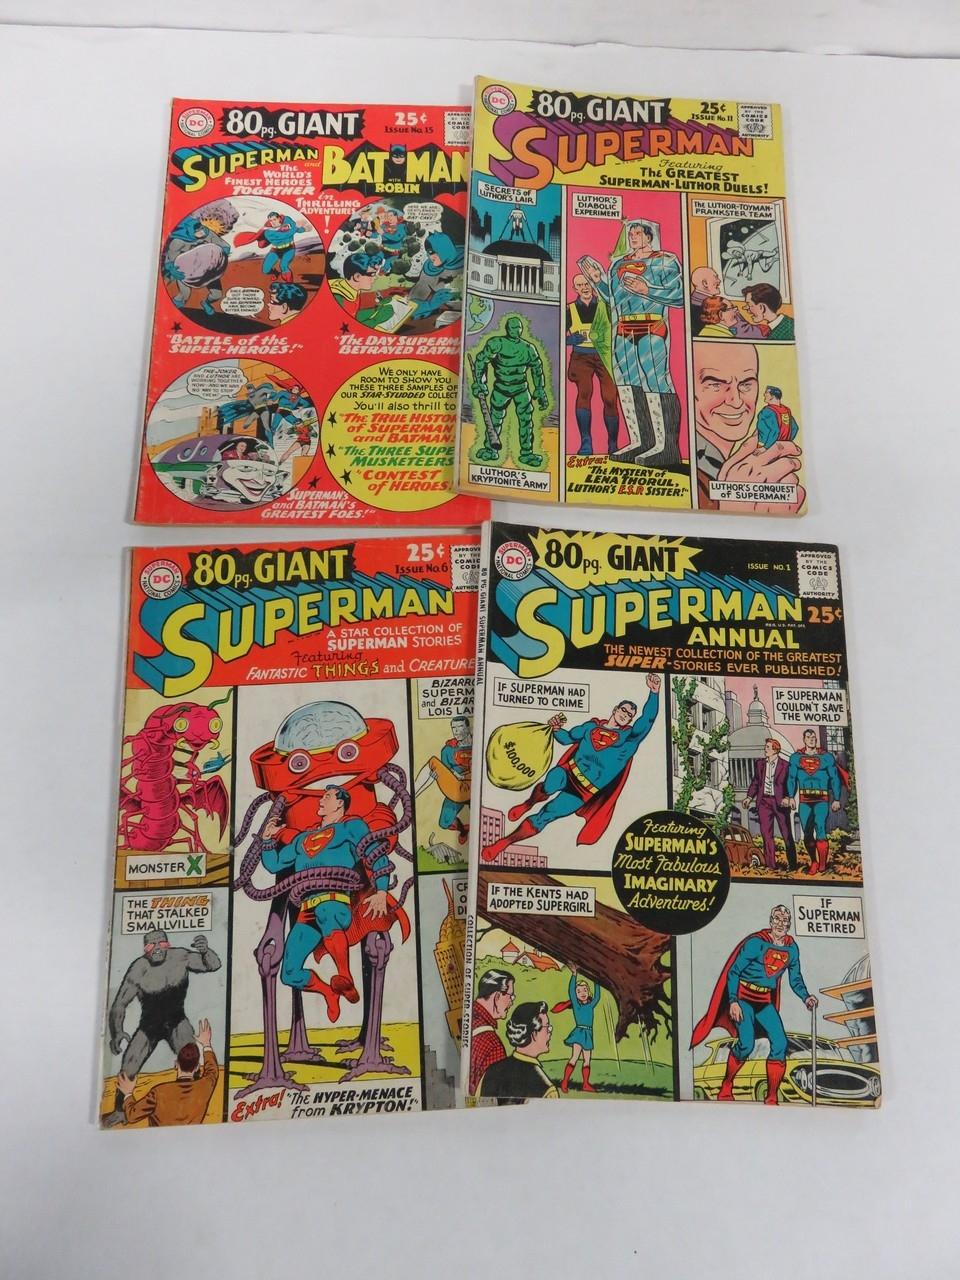 Superman 80 Page Giant Lot of (4) Silver Age